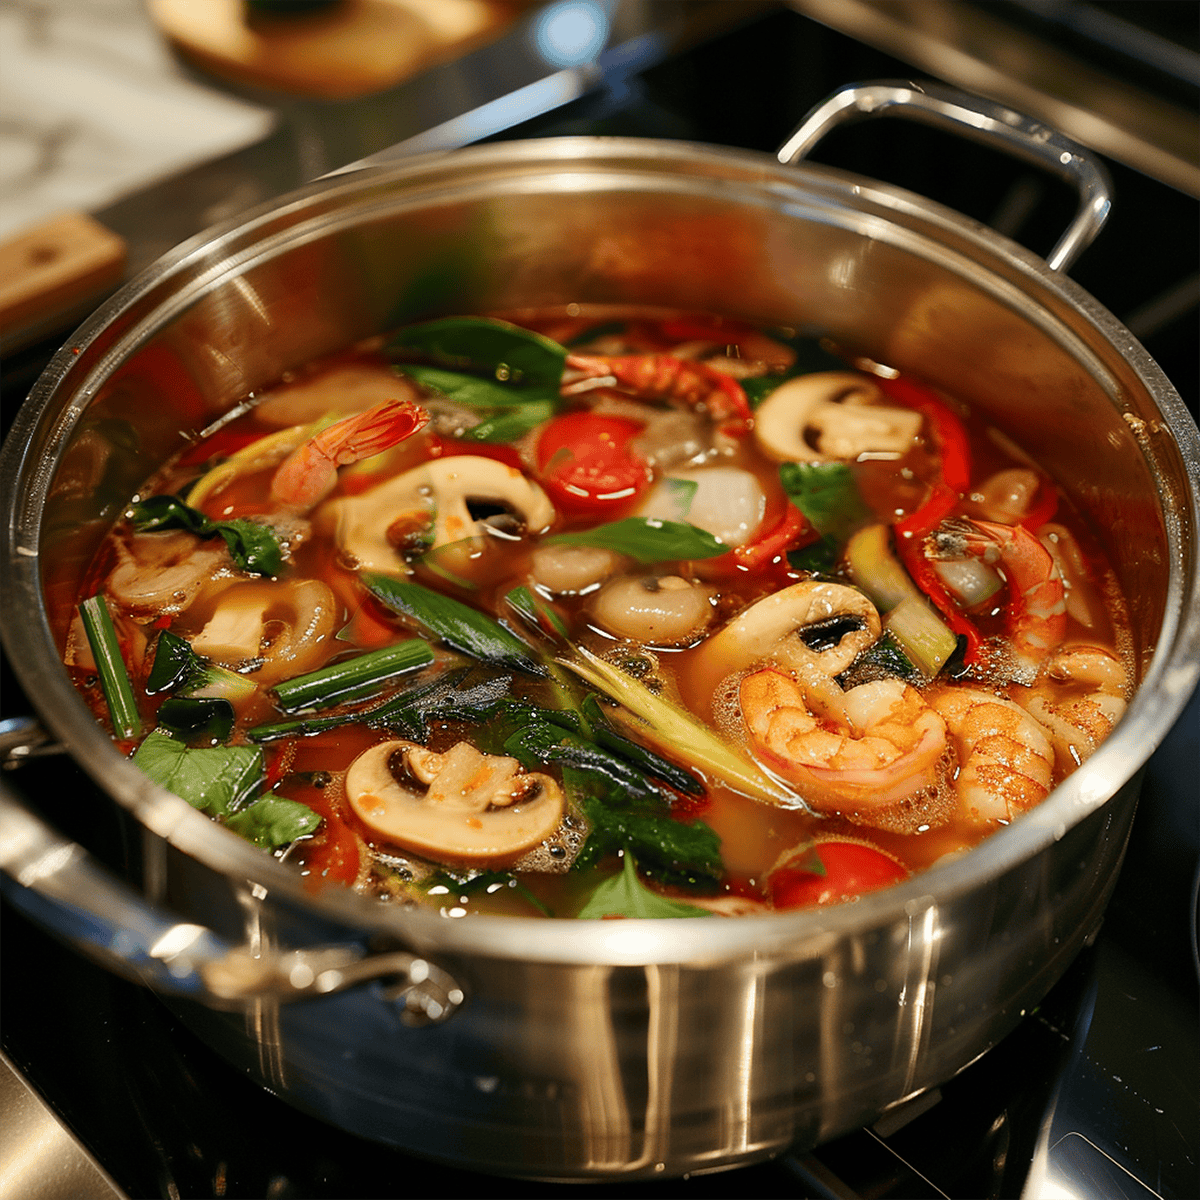 Adding raw shrimp to simmering broth in a cooking pot on the stove.